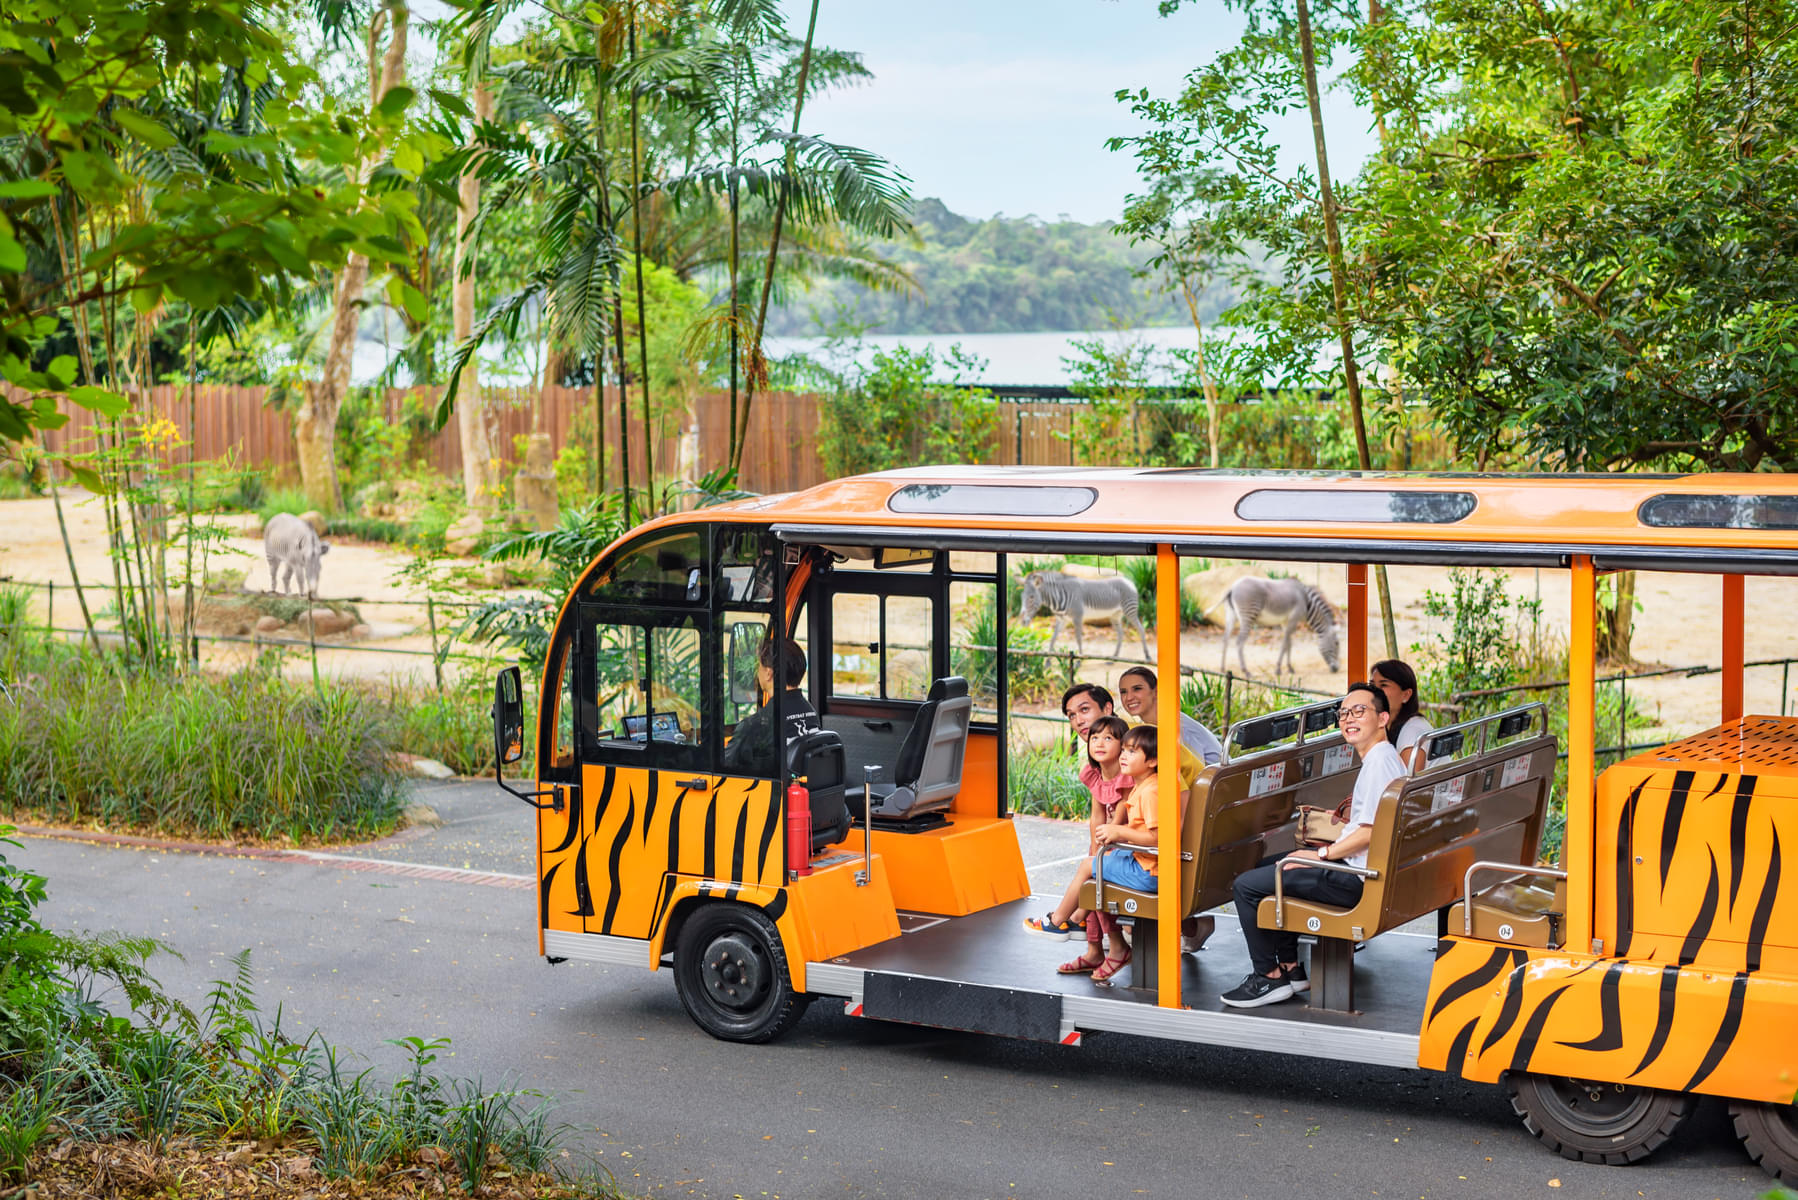 Embark on a picturesque tram journey to explore the beauty of the park.